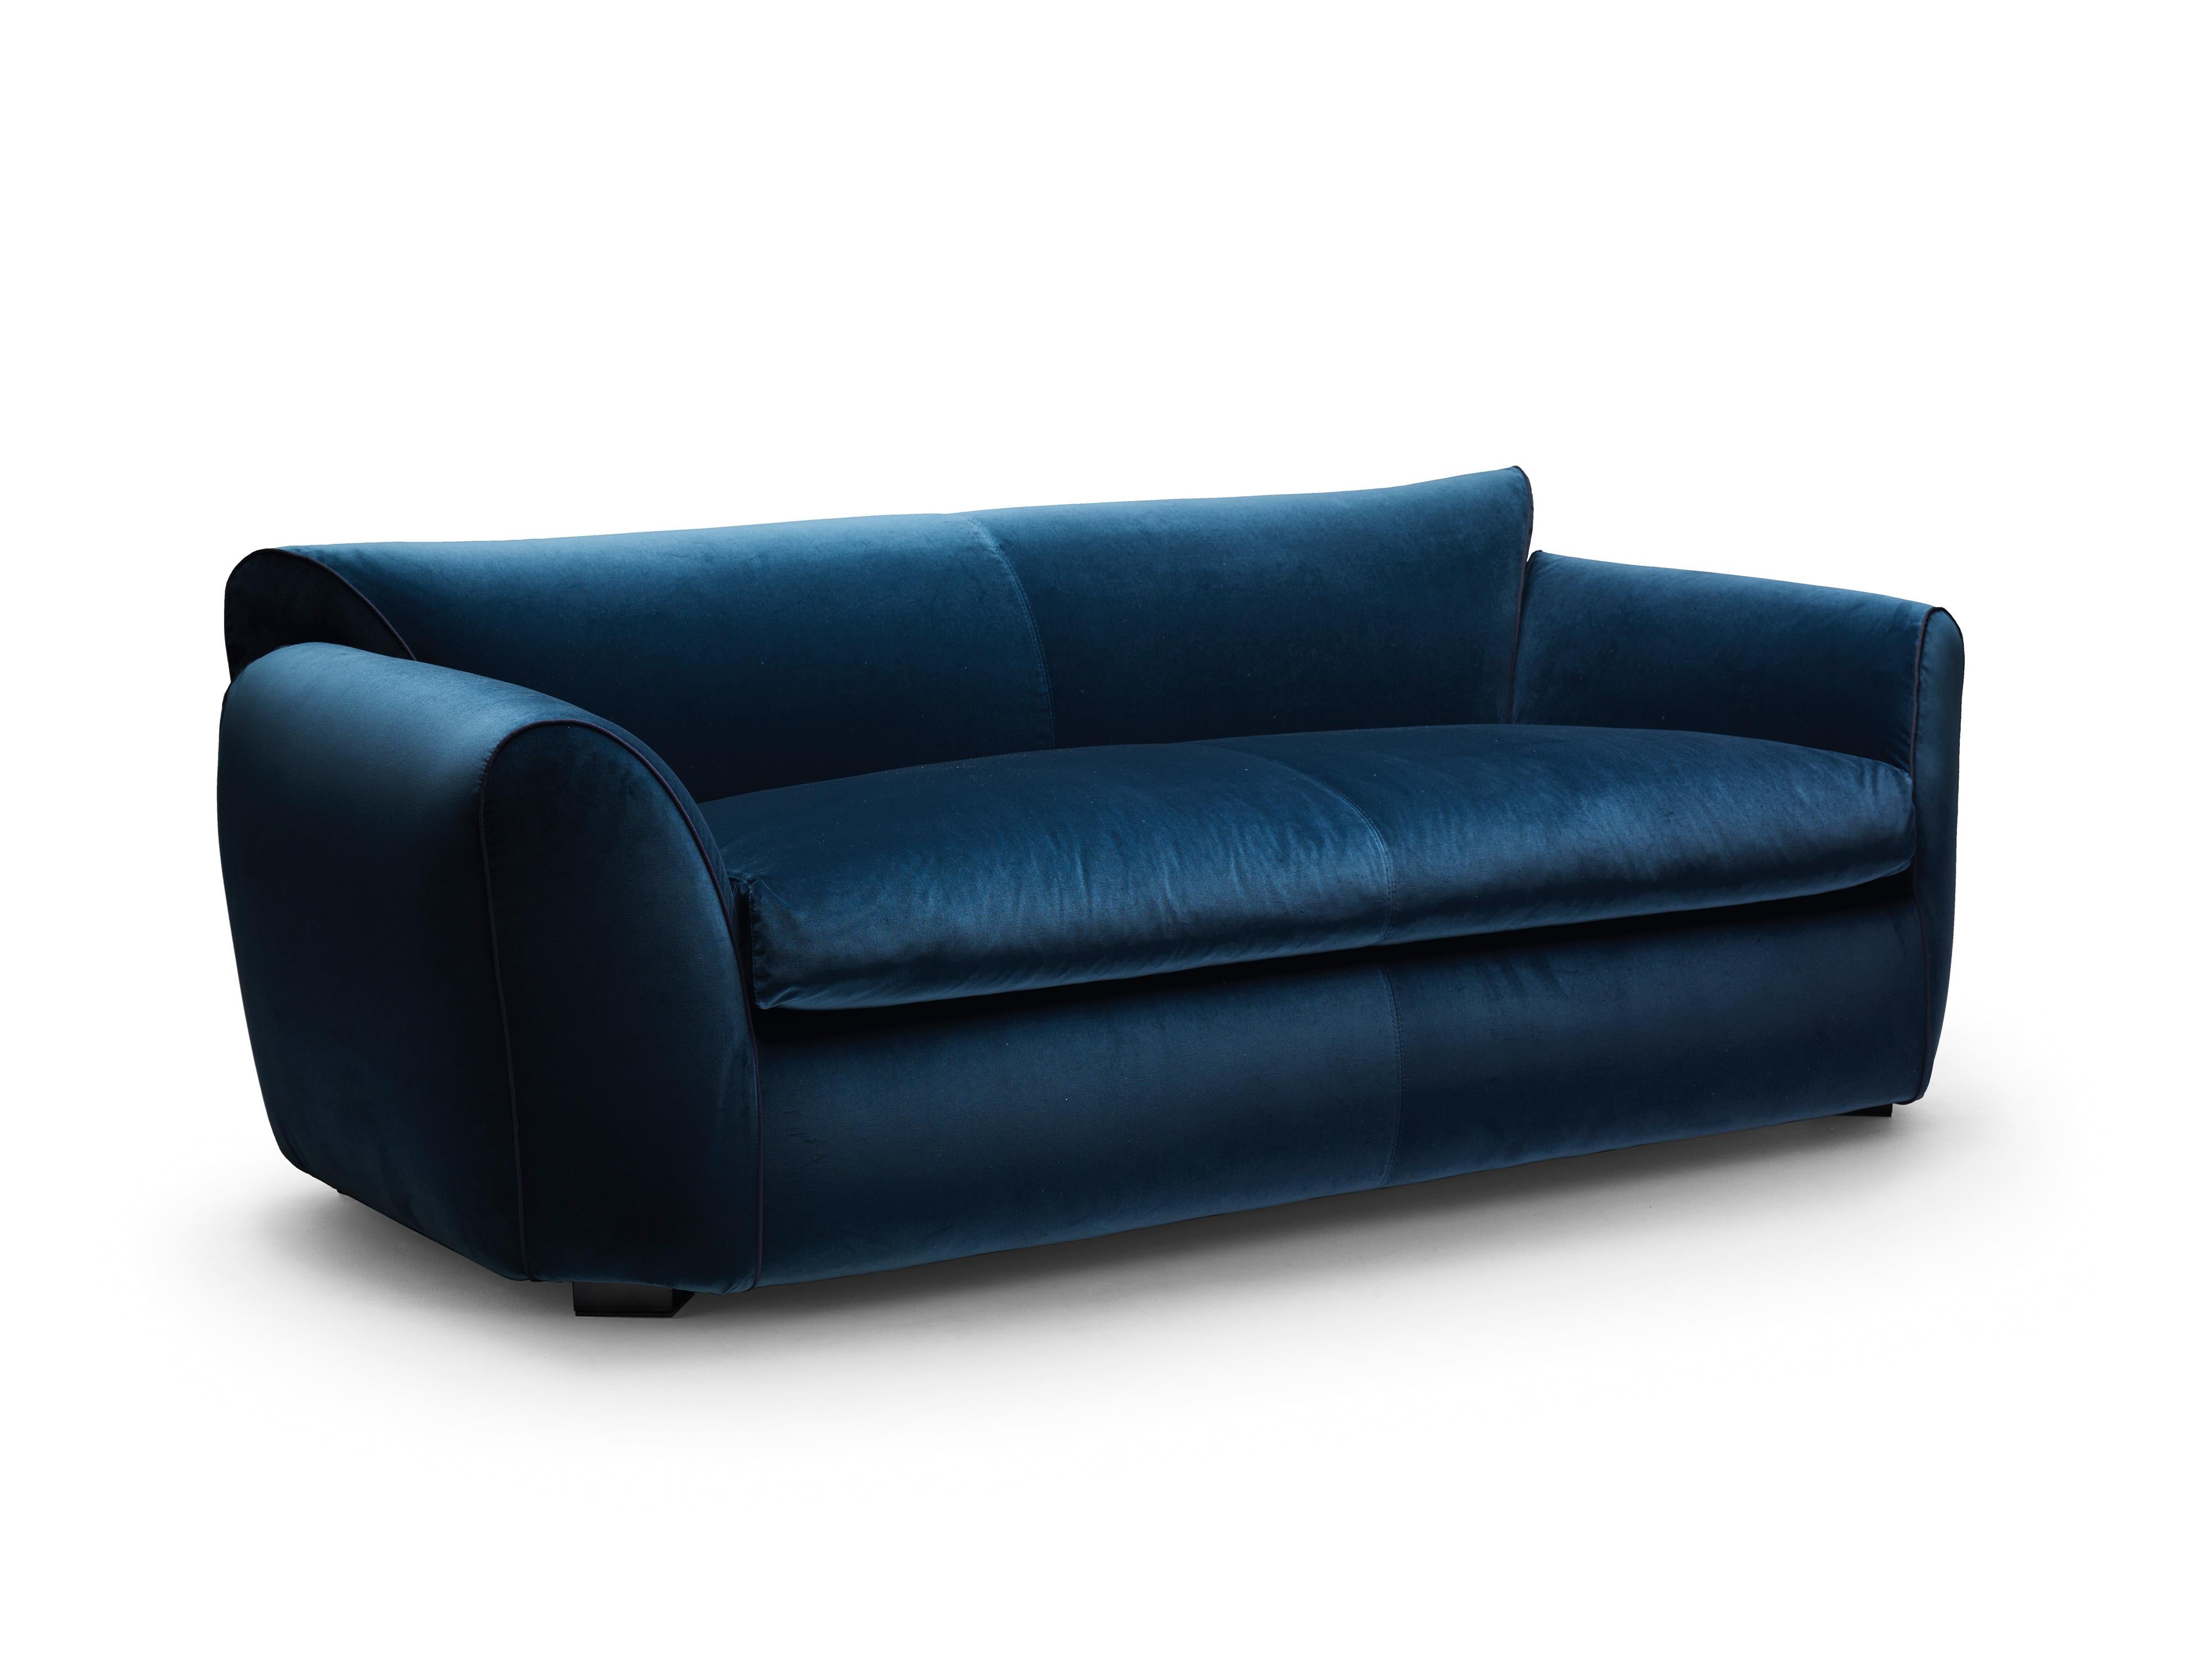 Rich, plush, round volumes and luscious comfort in a small-sized sofa. The ends of the armrests and backrest are angled at 45 degrees: This visual trick greatly increases the perceived width of the elements and the perceived size of the sofa. In